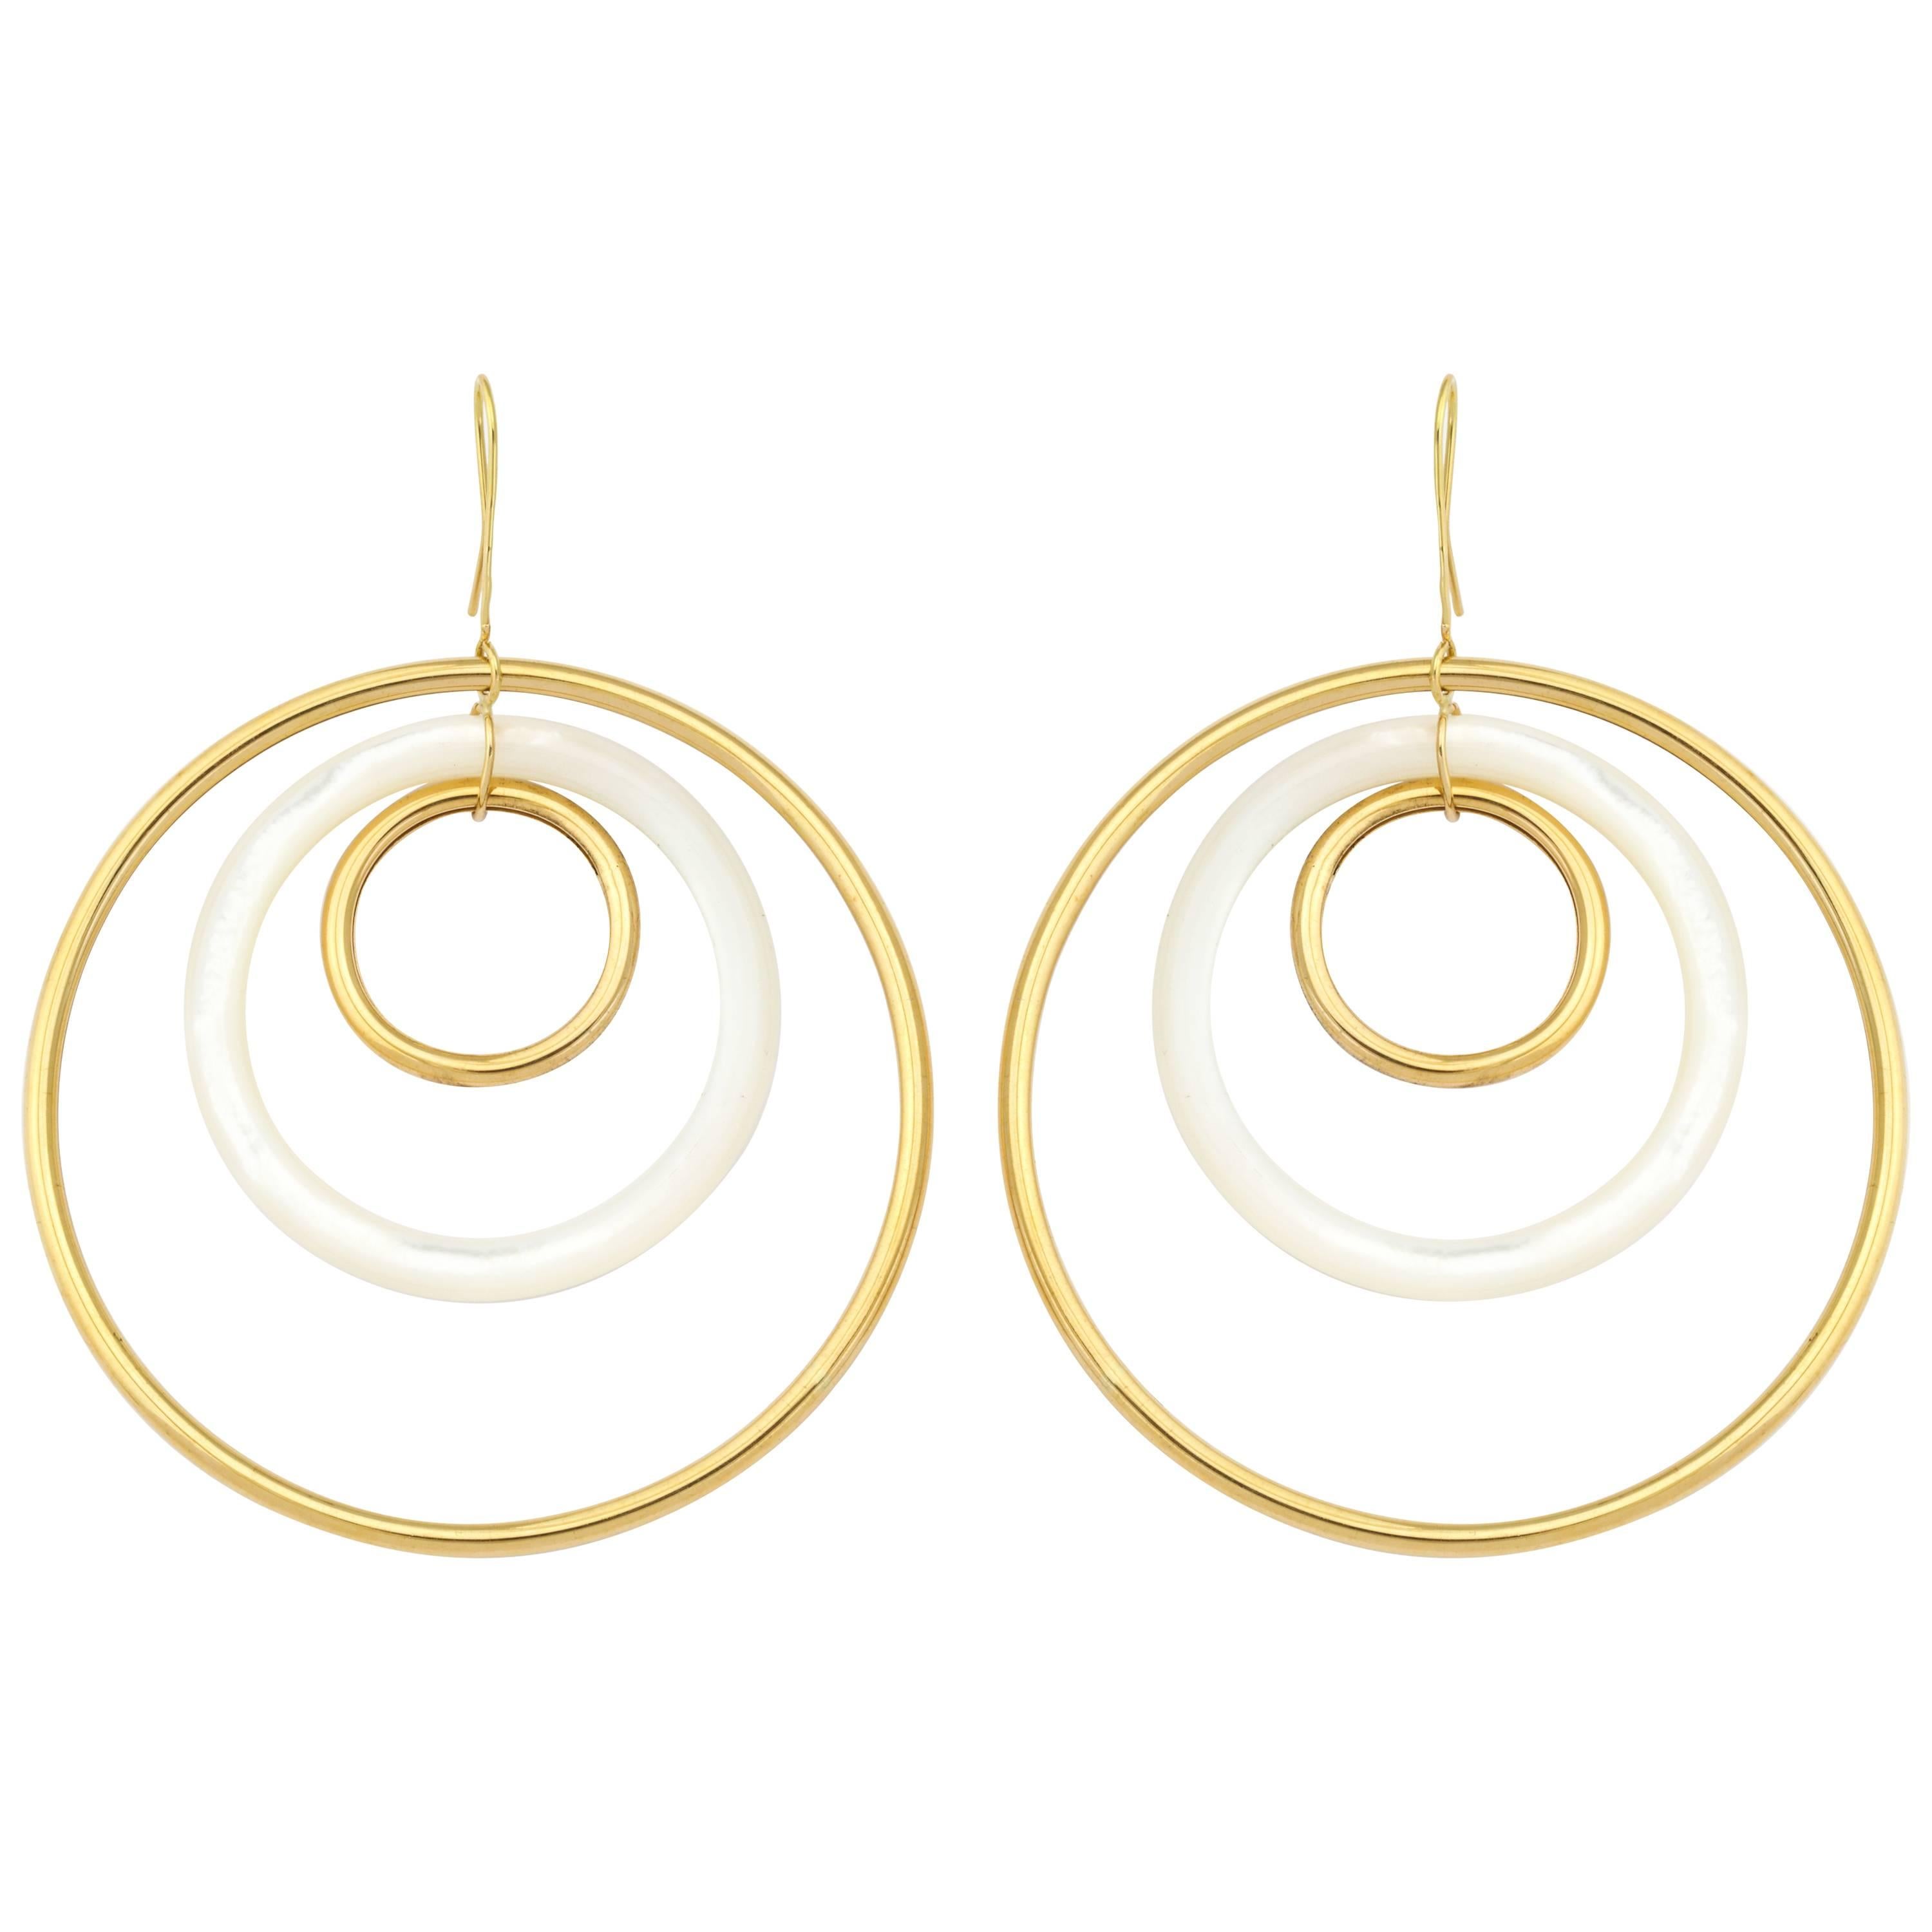 Faraone Mennella Concentric Mother-of-Pearl Earrings For Sale